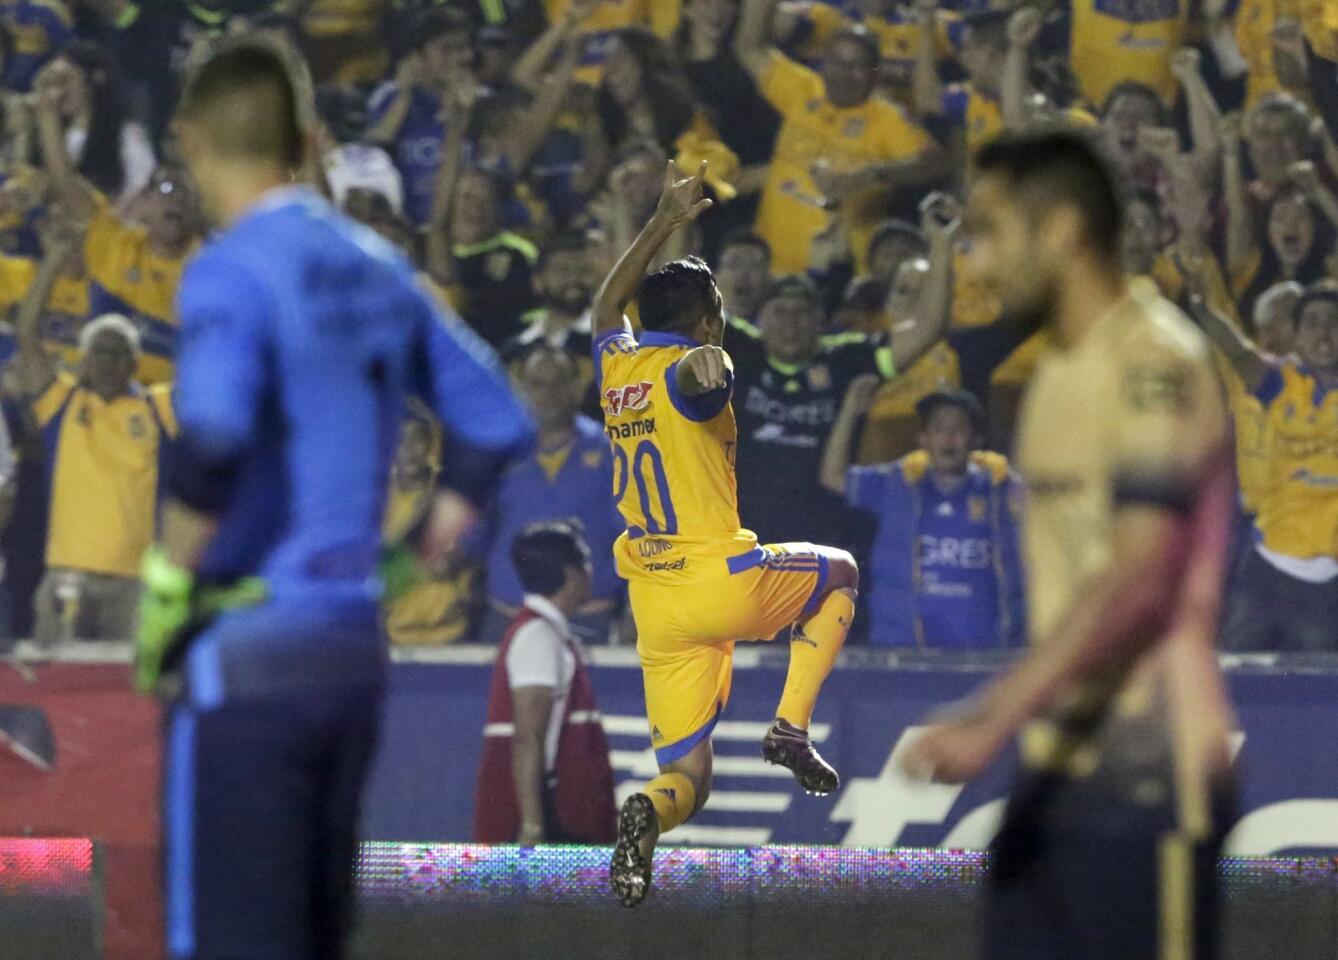 Football Soccer - Tigres v Pumas - The first leg of their Mexican first division final soccer match - Universitario stadium, Monterrey, Mexico - 10/12/15 Tigres' Javier Aquino (20) celebrates after scoring against Pumas. REUTERS/Daniel Becerril ** Usable by SD ONLY **